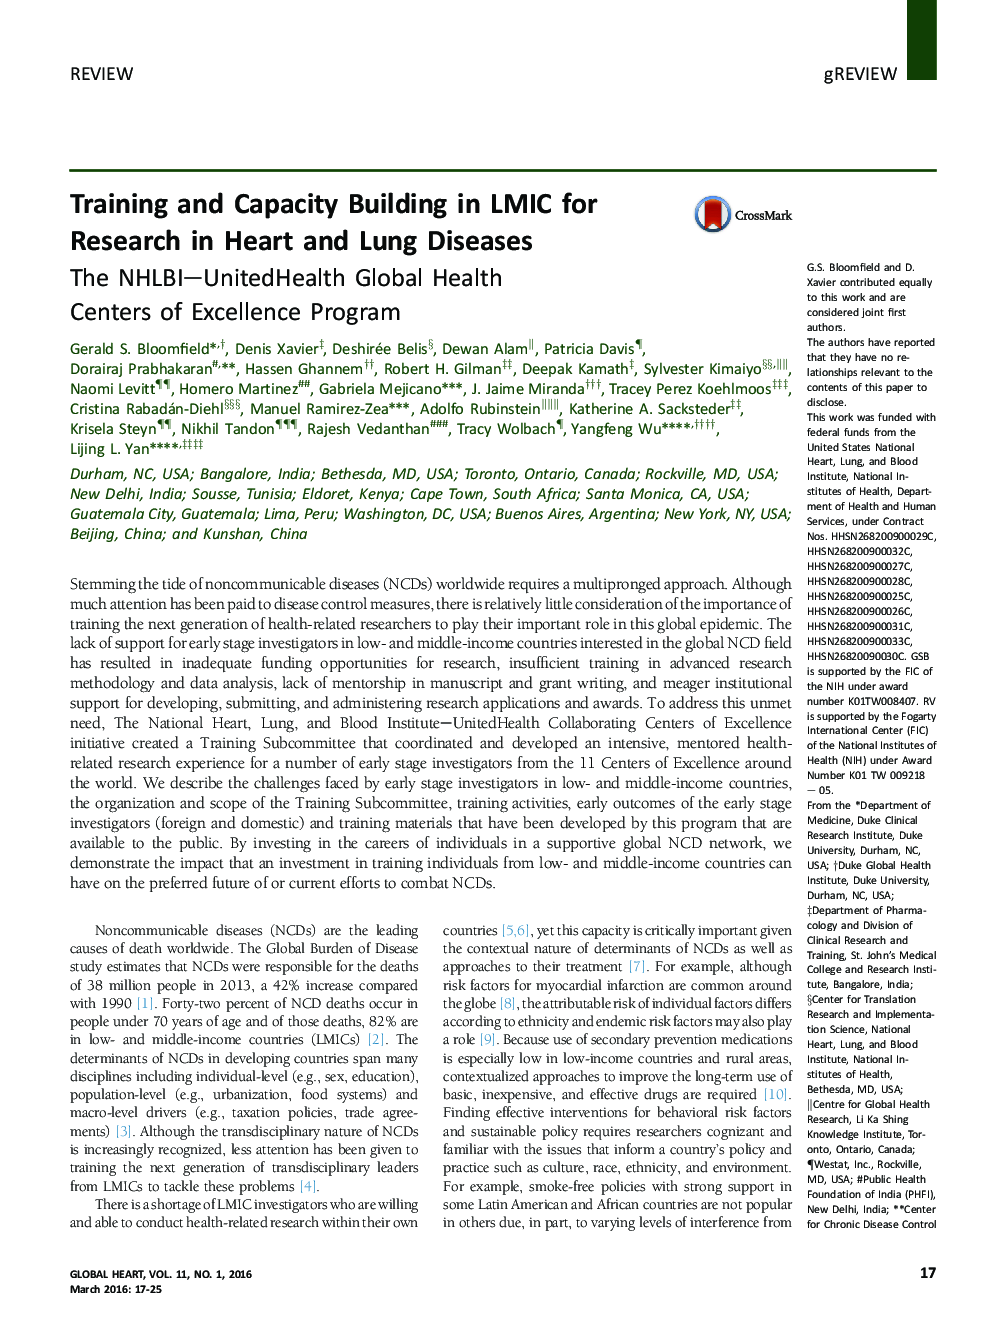 Training and Capacity Building in LMIC for Research in Heart and Lung Diseases: The NHLBI-UnitedHealth Global Health Centers of Excellence Program